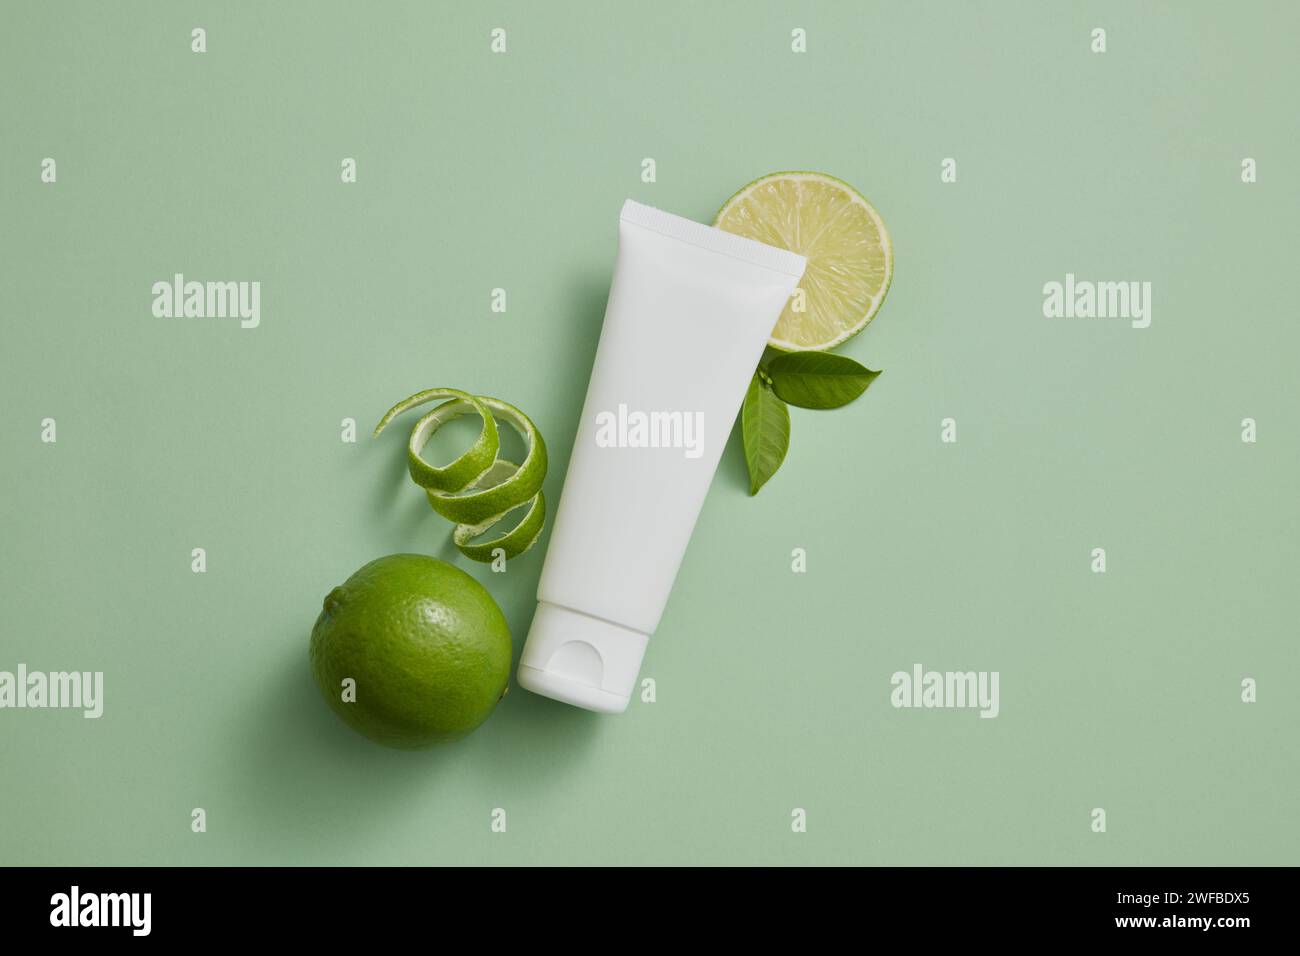 An unlabeled tube in white color displayed with Lime slices and peel. Lime (Citrus aurantiifolia) essential oil can remove dead cells that accumulate Stock Photo